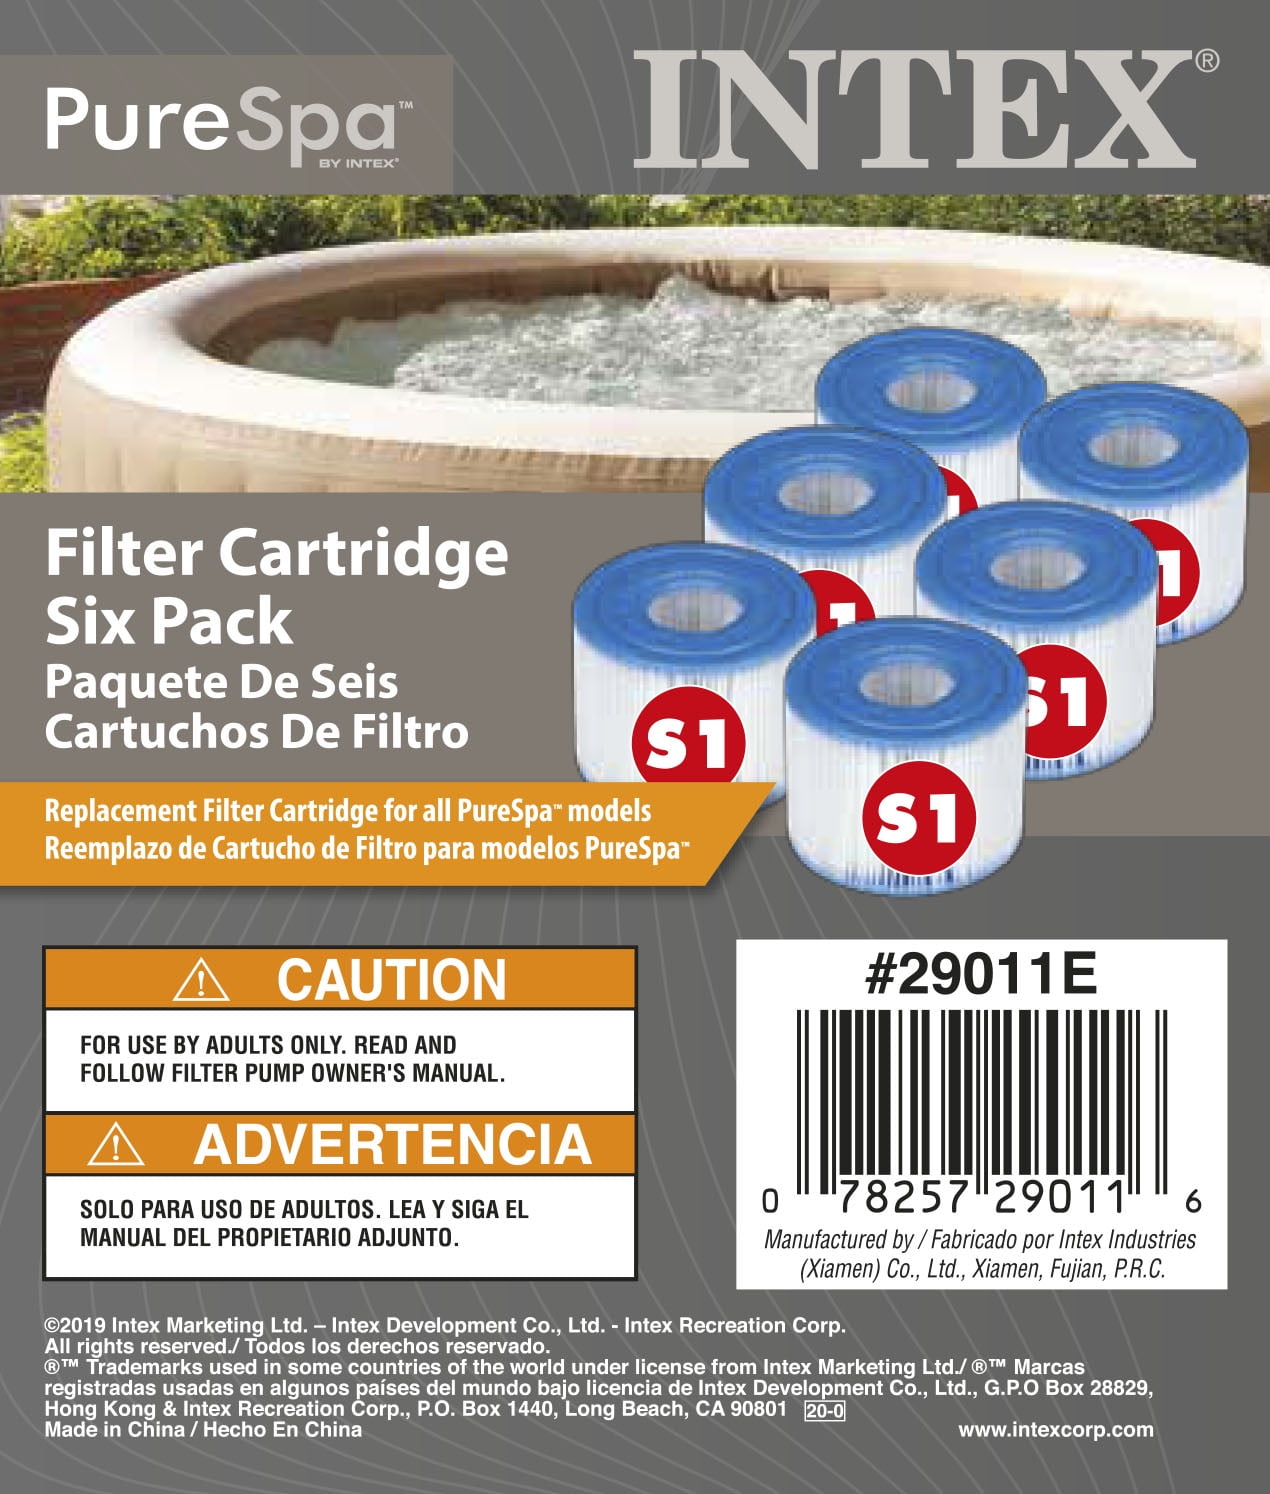 Intex Filter Cartridge - Type S1 - in Twin Packs by GEEZYThe Magic Toy Shop